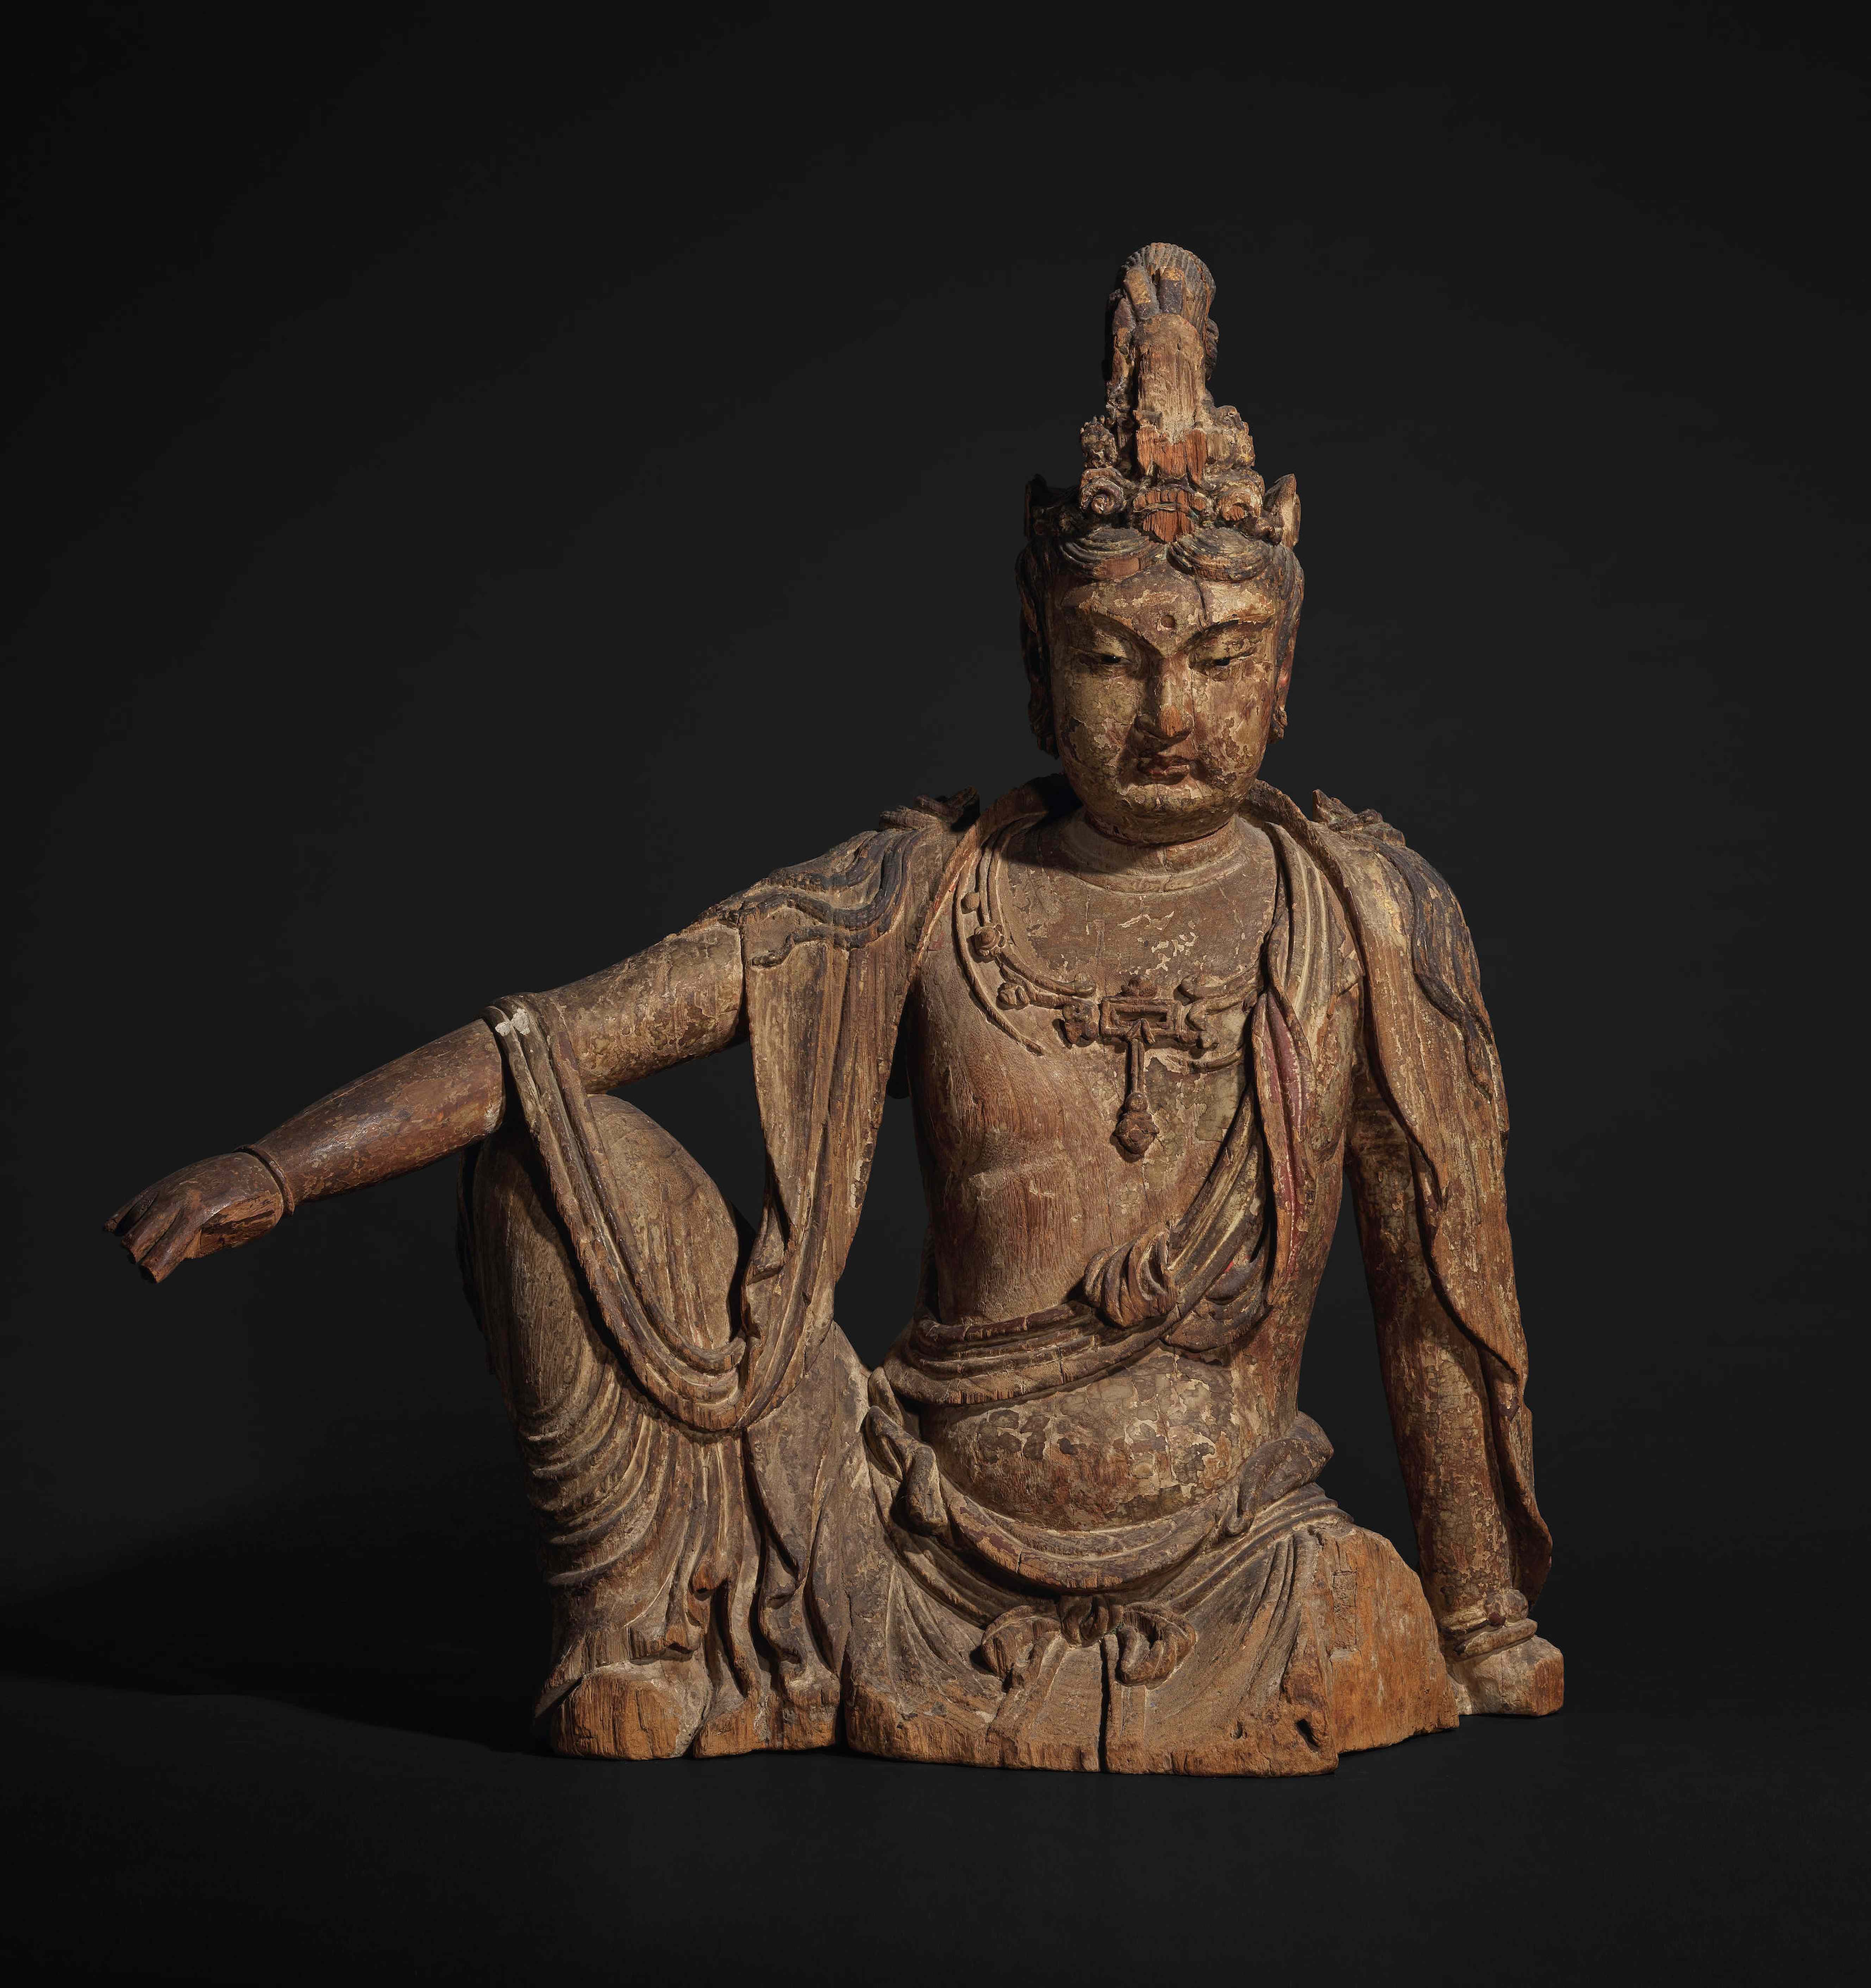 A MAGNIFICENT AND VERY RARE LARGE WOOD FIGURE OF THE BODHISATTVA GUANYIN IN WATER MOON FORMJin